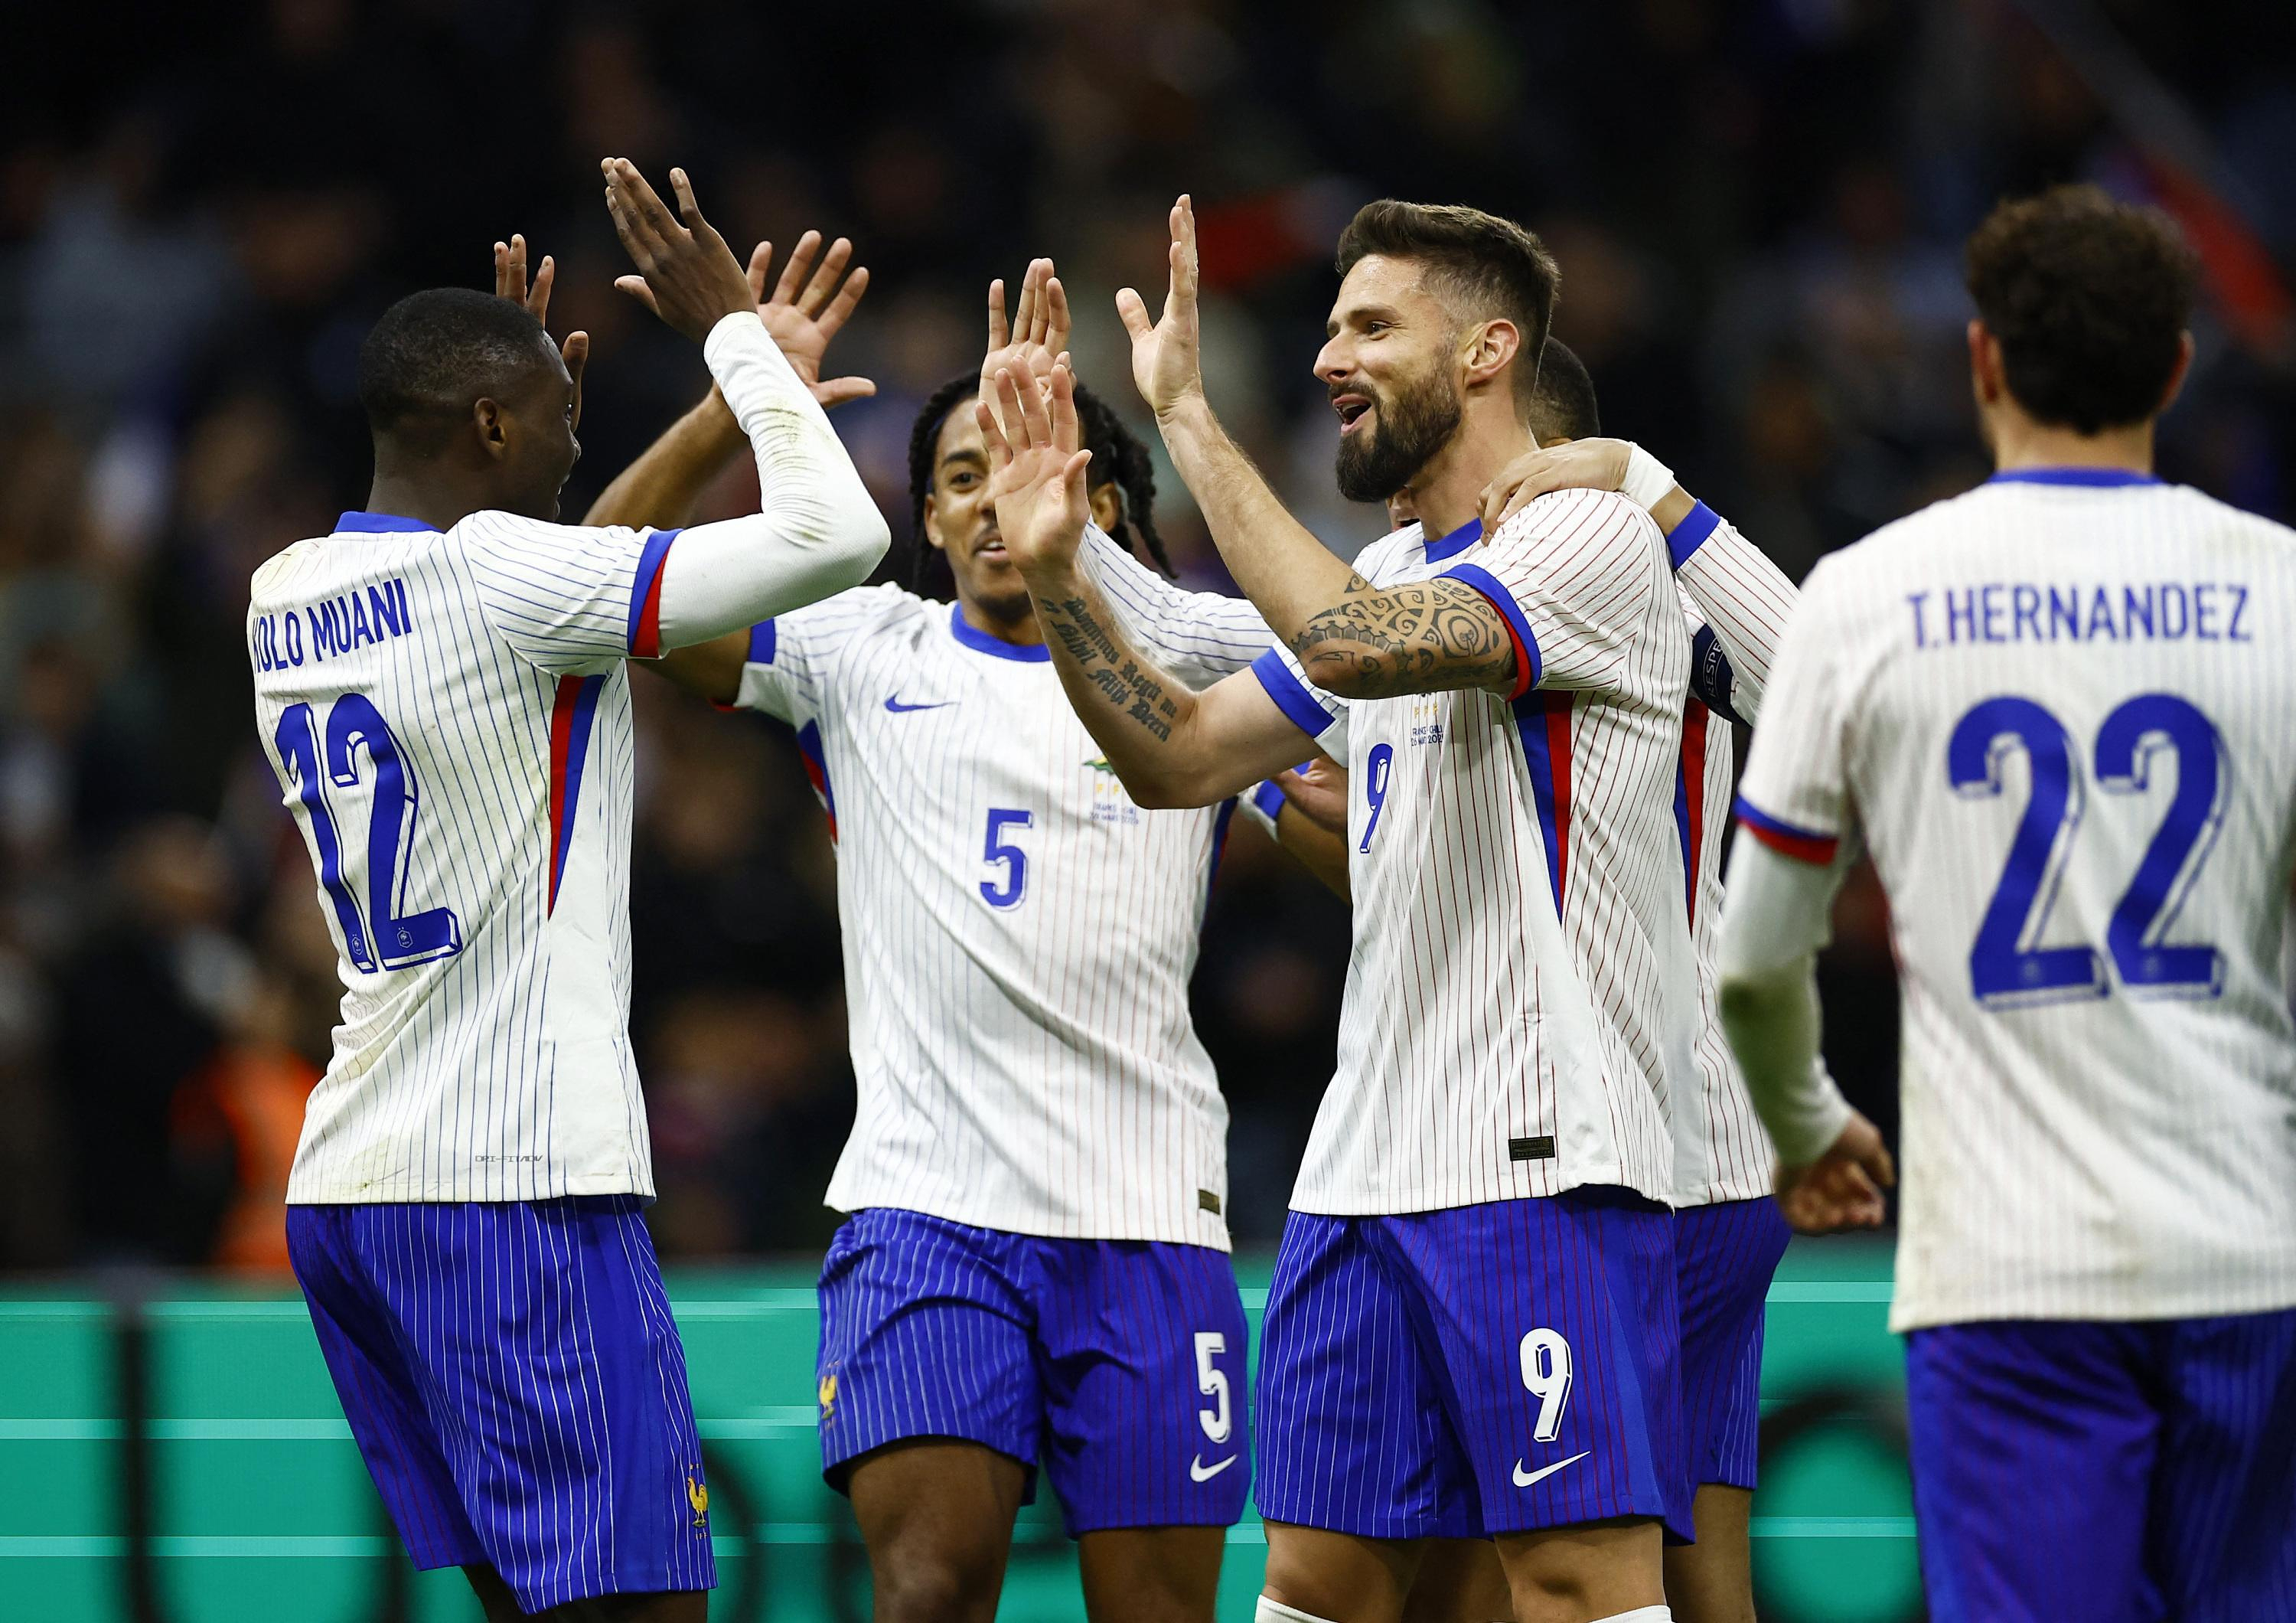 Friendly: without convincing, the Blues find a smile again against Chile